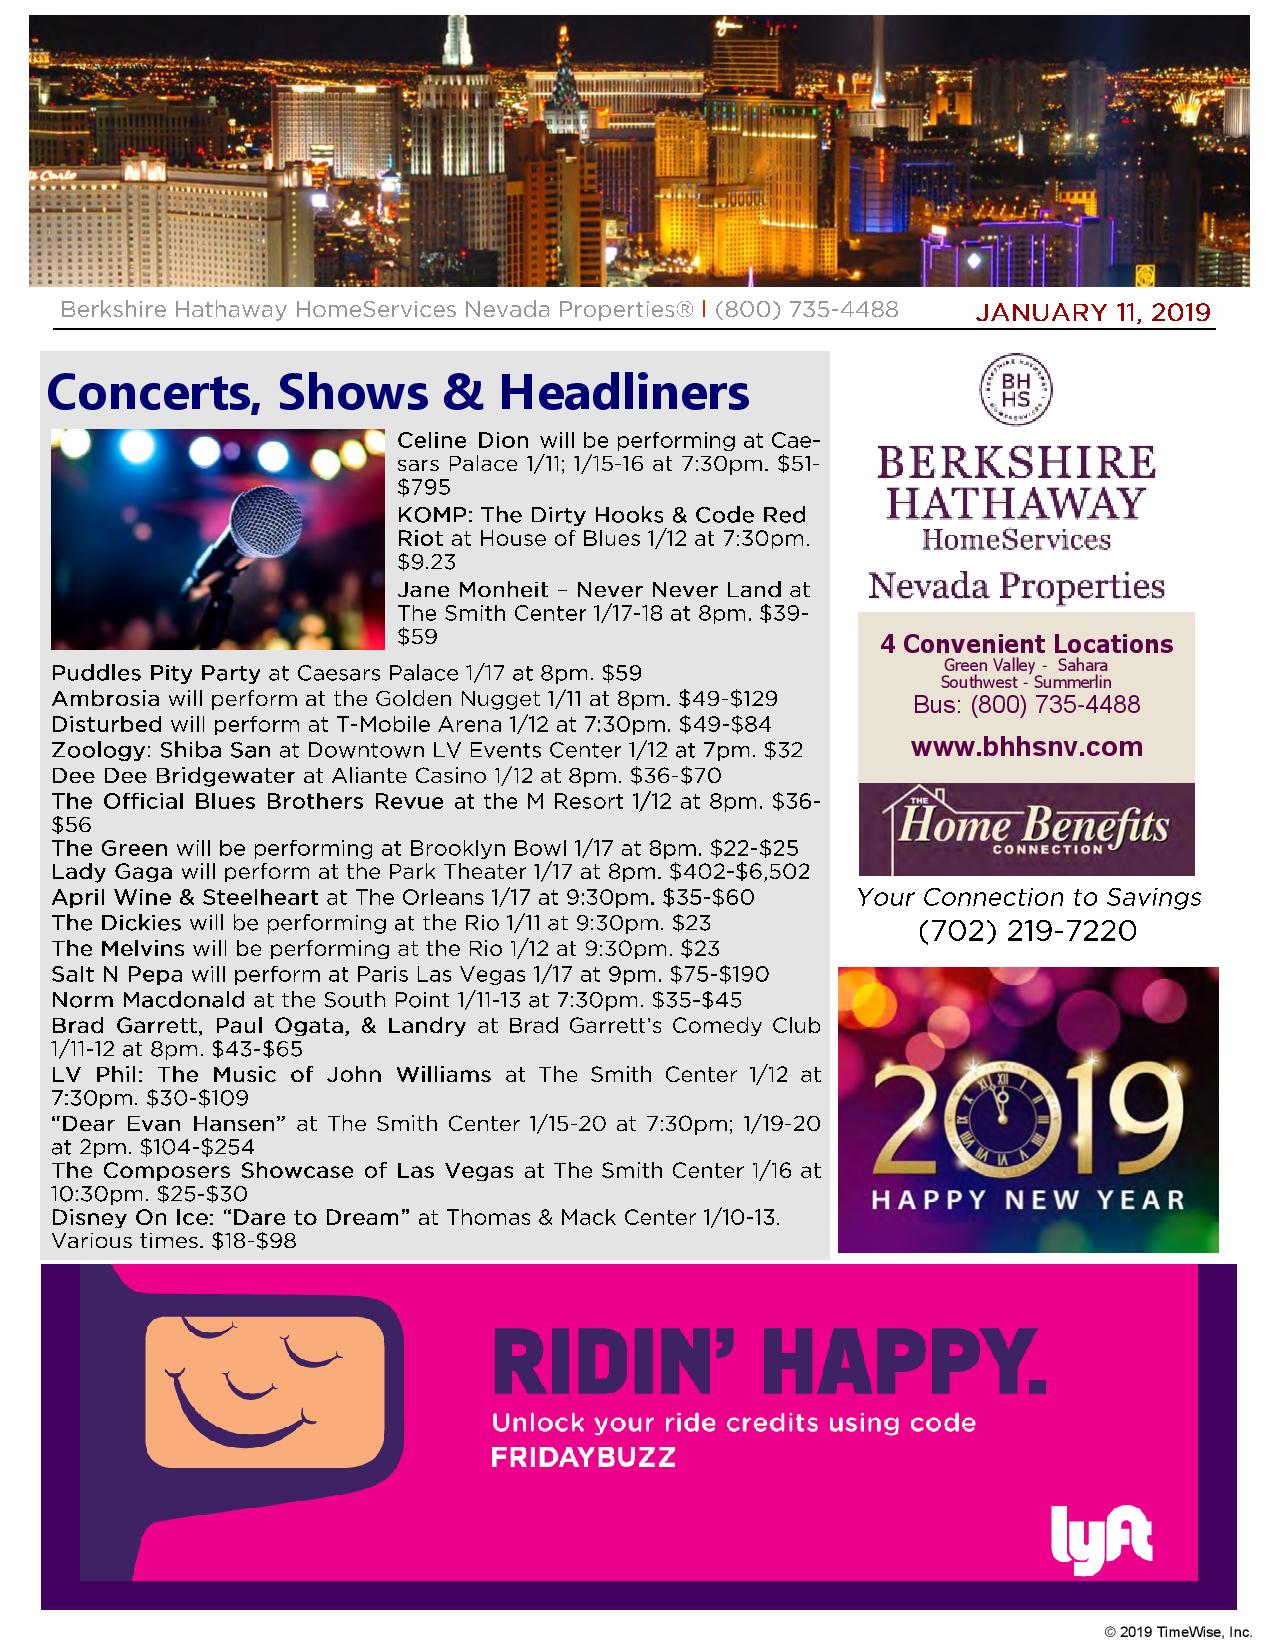 Berkshire-Hathaway-HomeServices-fridaybuzz Jan 11 2019-page-001